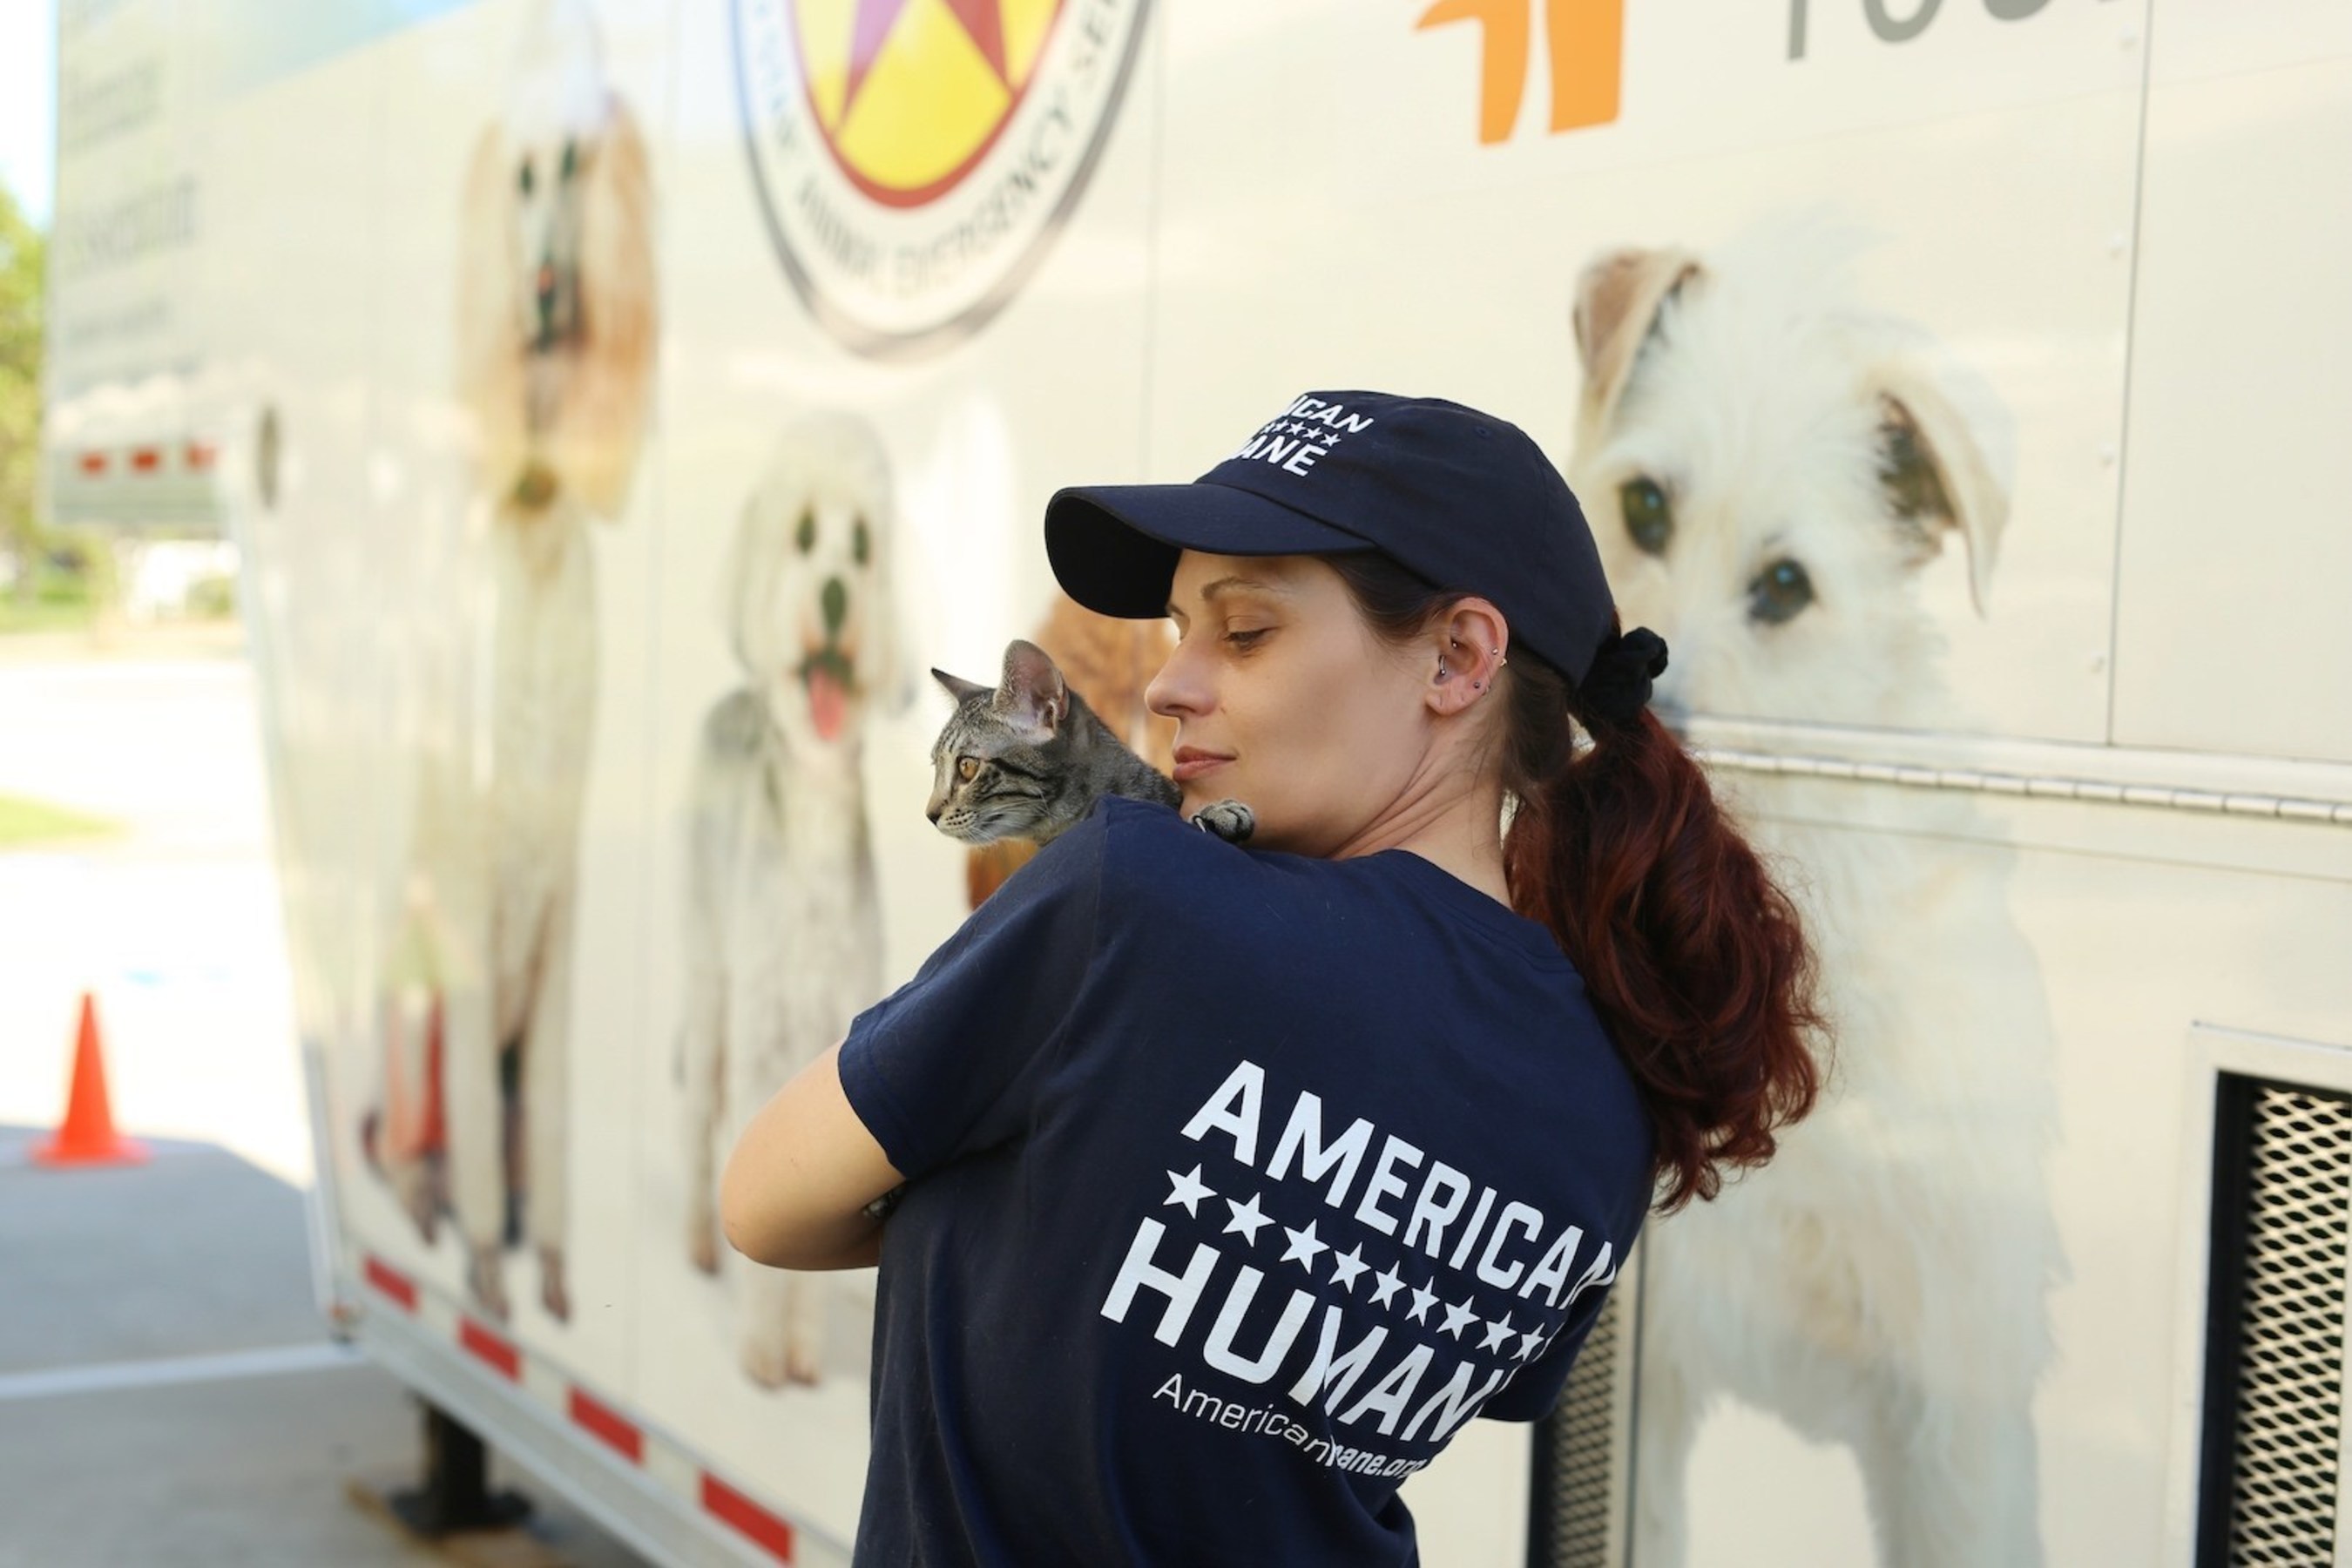 American Humane's legendary animal rescue team has set up a major emergency aid and reunification center for pets caught in the devastation of Hurricane Matthew.